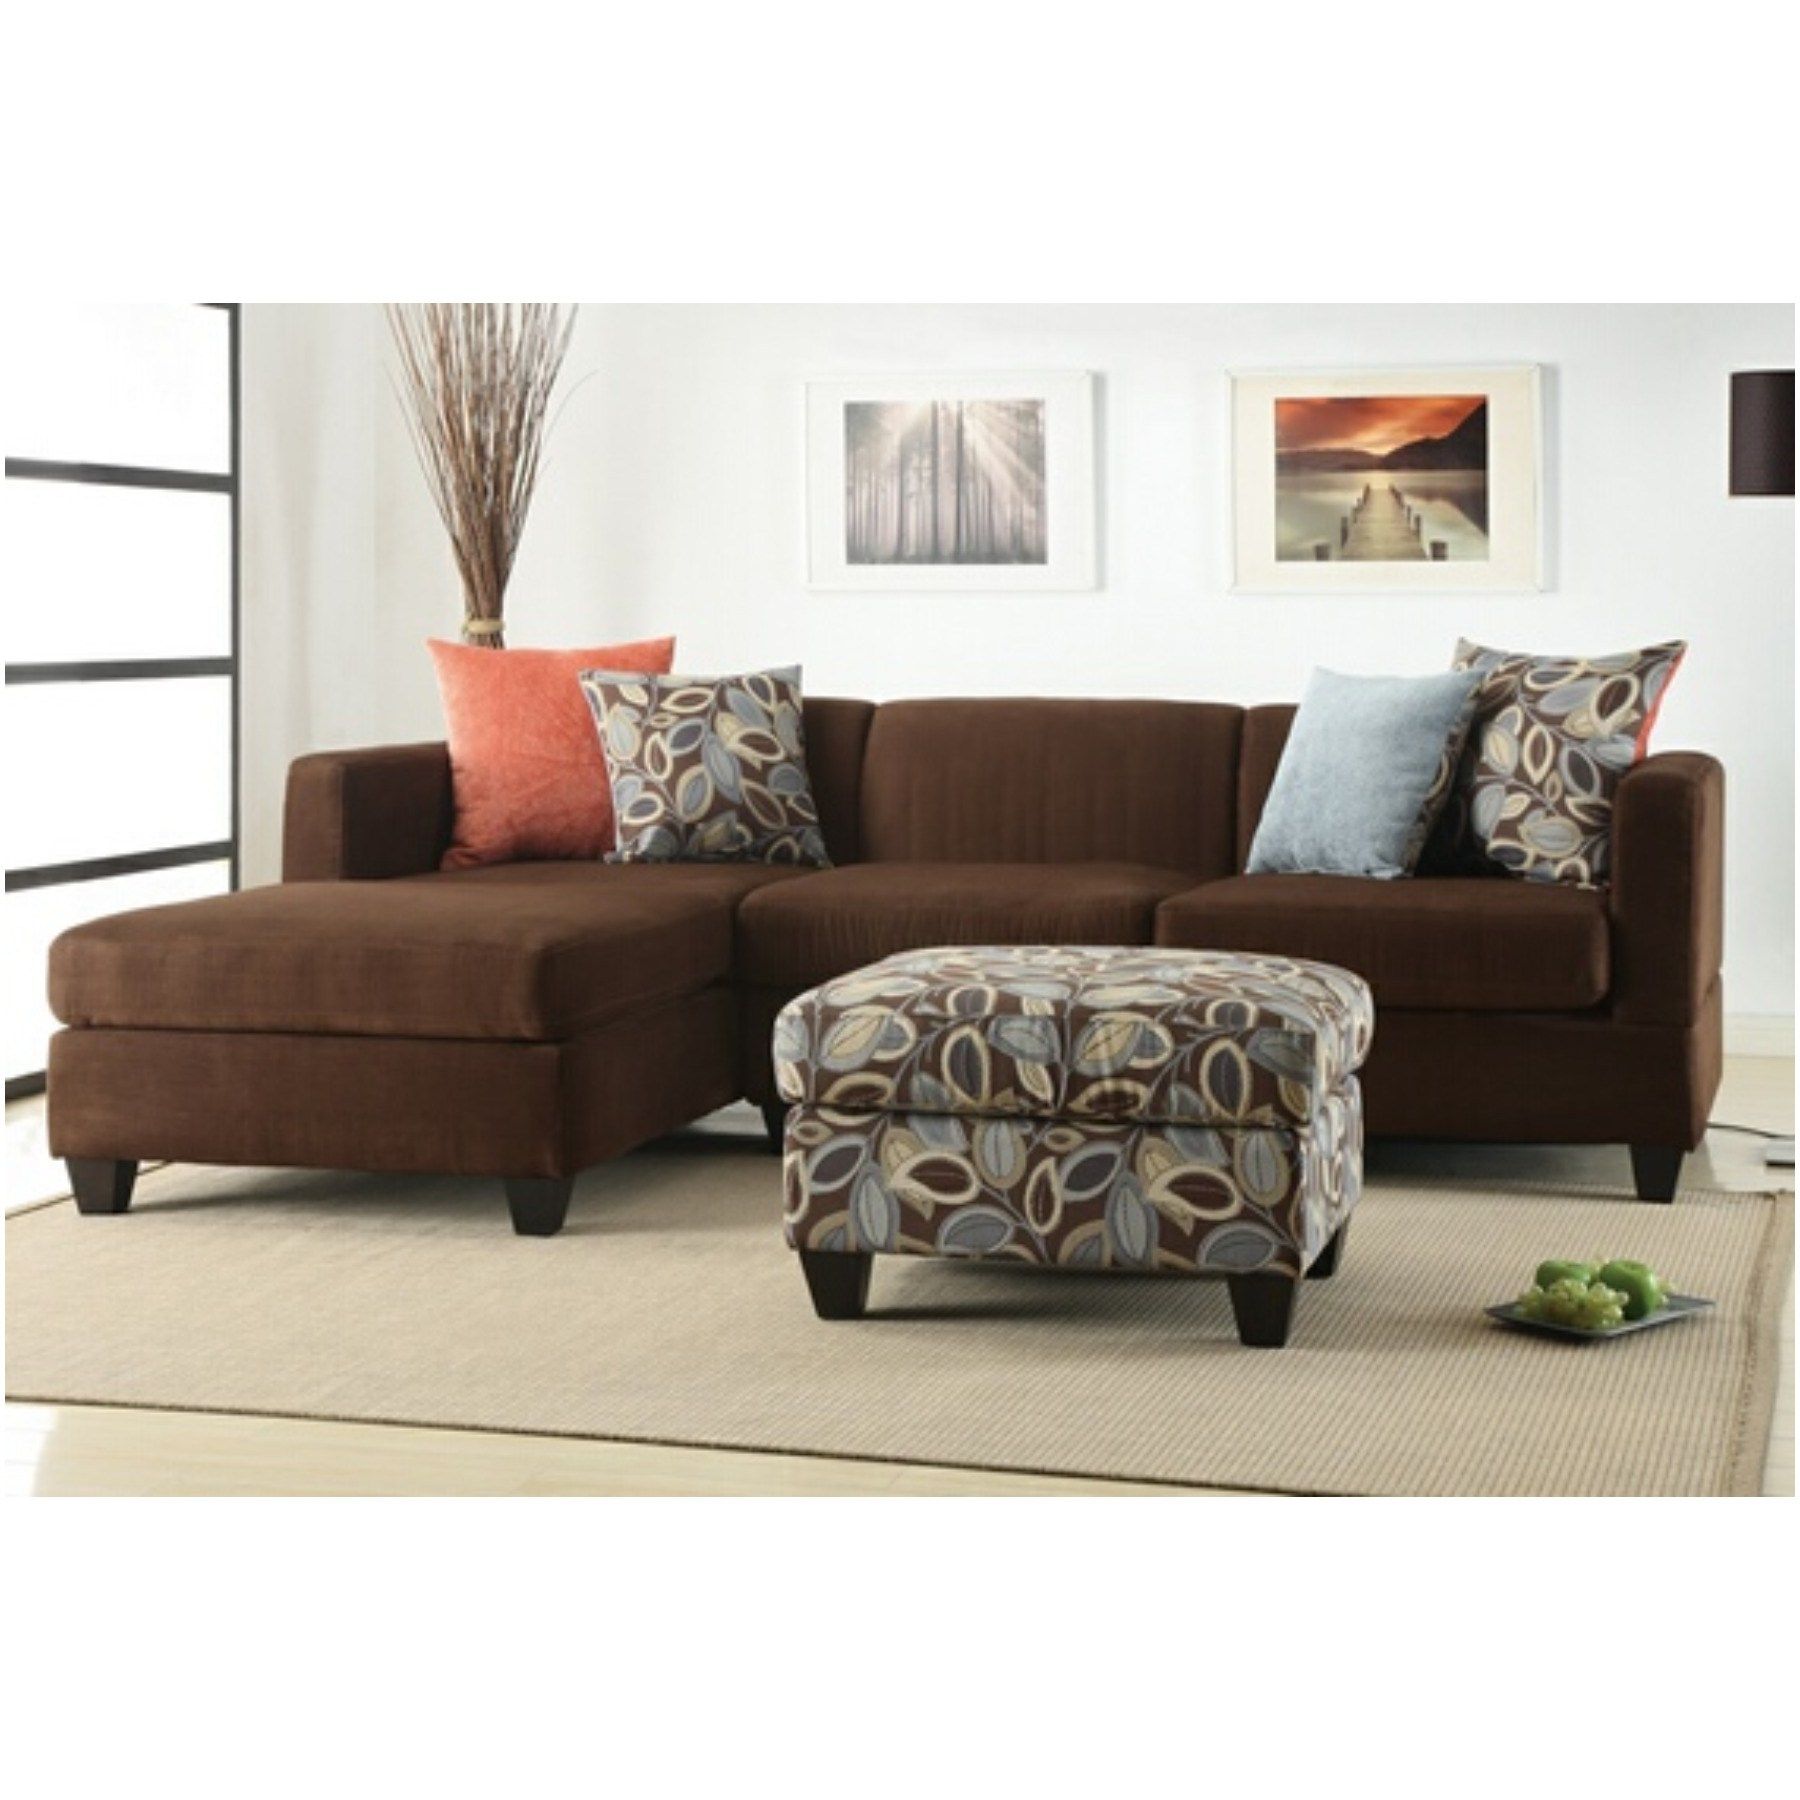 Cozy Sectional Sofas Edmonton 46 With Additional Bentley Sectional For Bentley Sectional Leather Sofa (View 6 of 12)